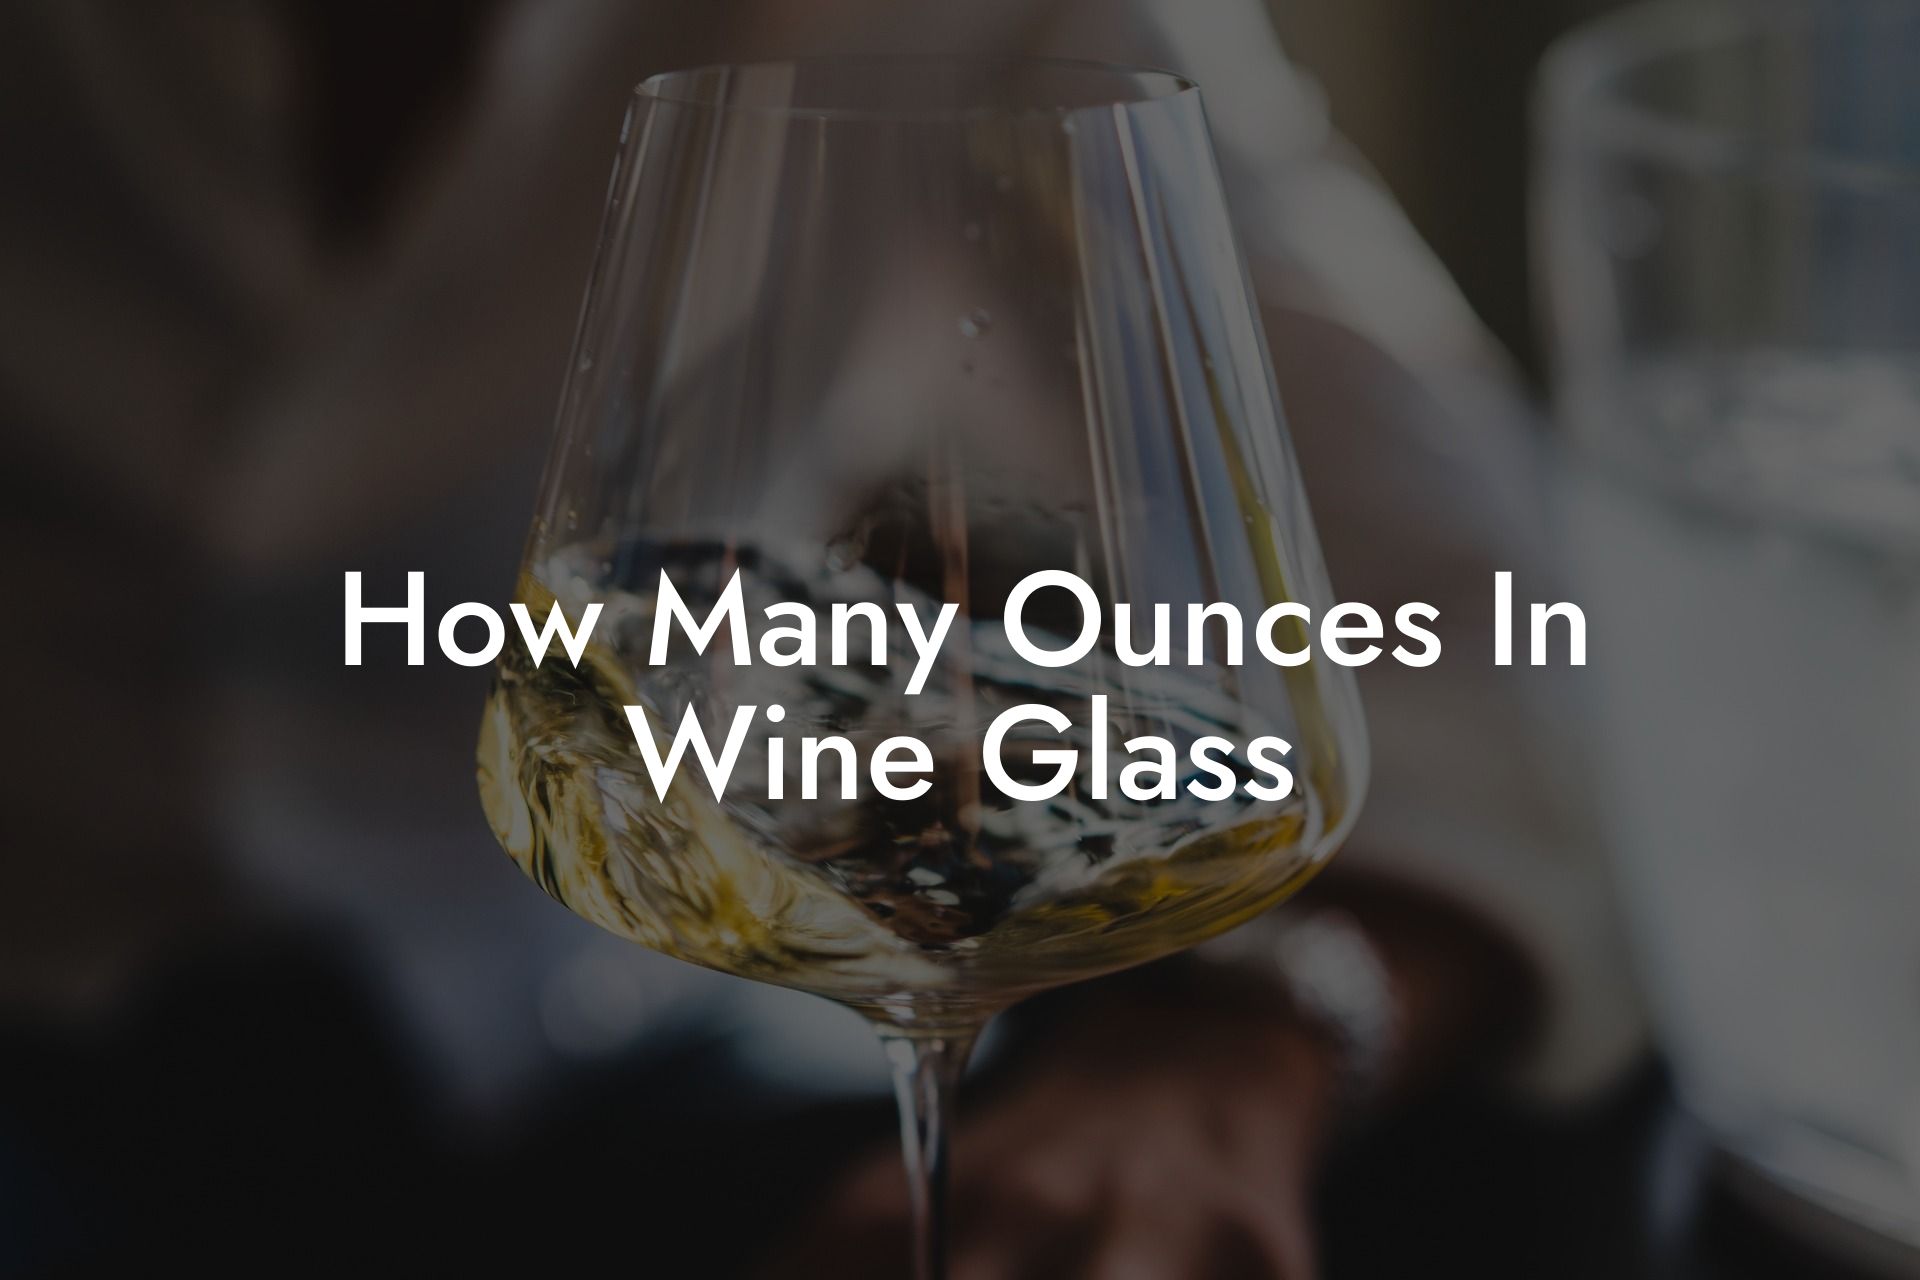 How Many Ounces In Wine Glass